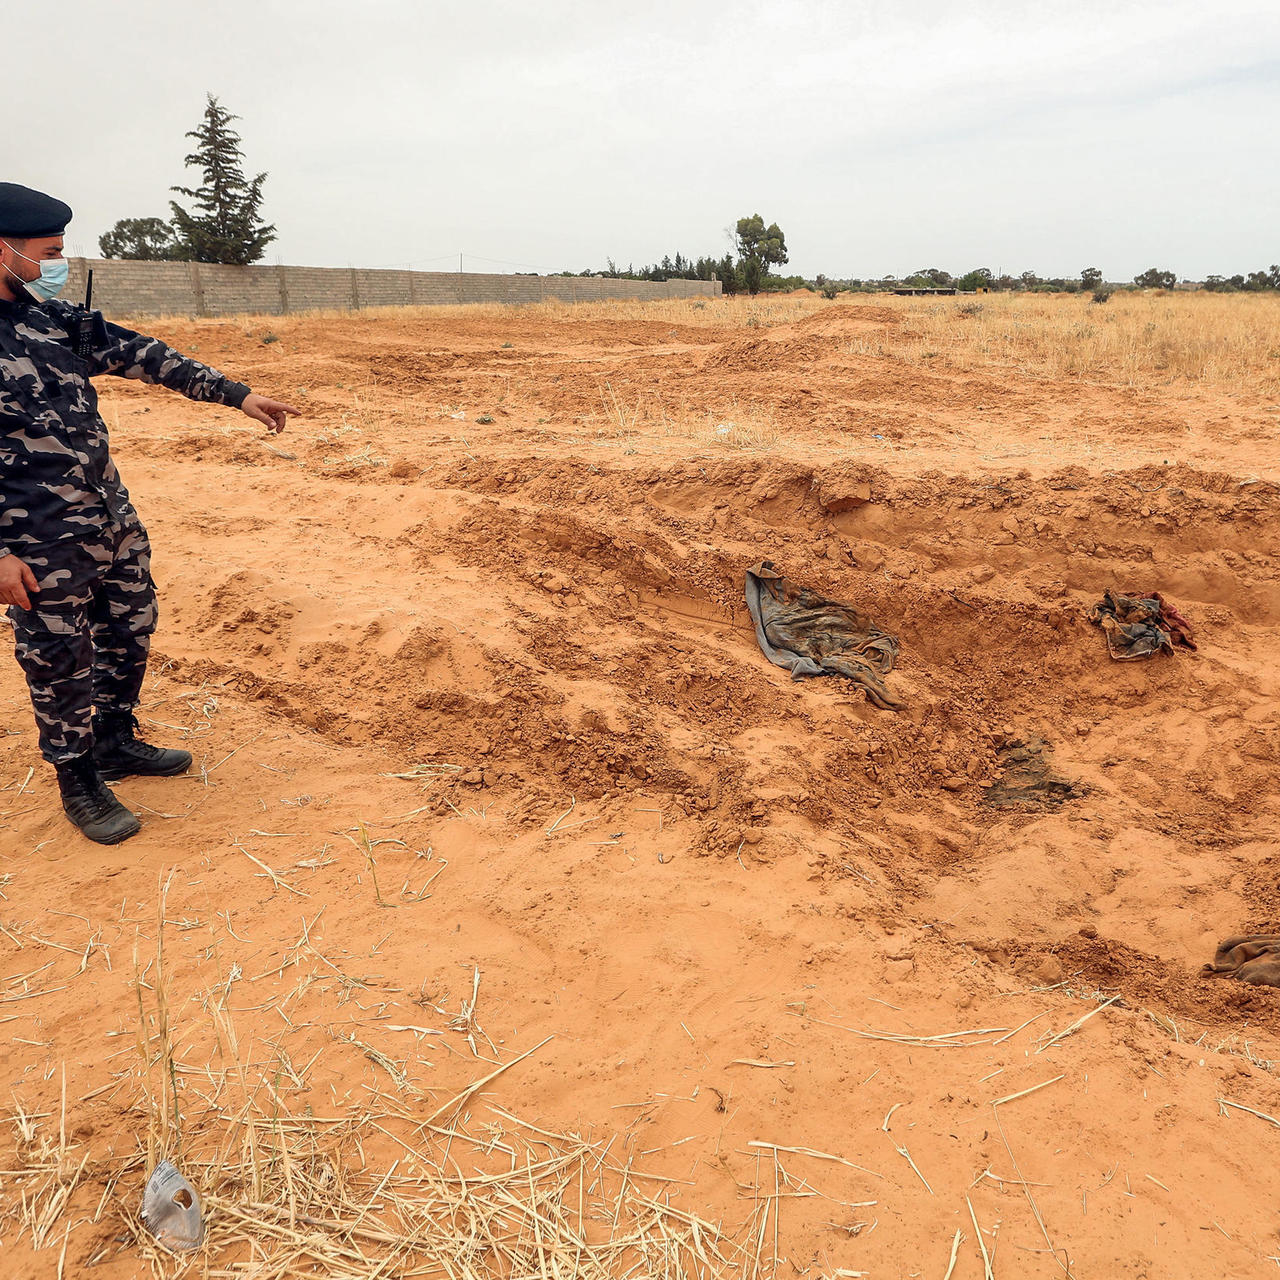 UN VOICES ‘HORROR’ AFTER REPORTS OF LIBYA MASS GRAVES